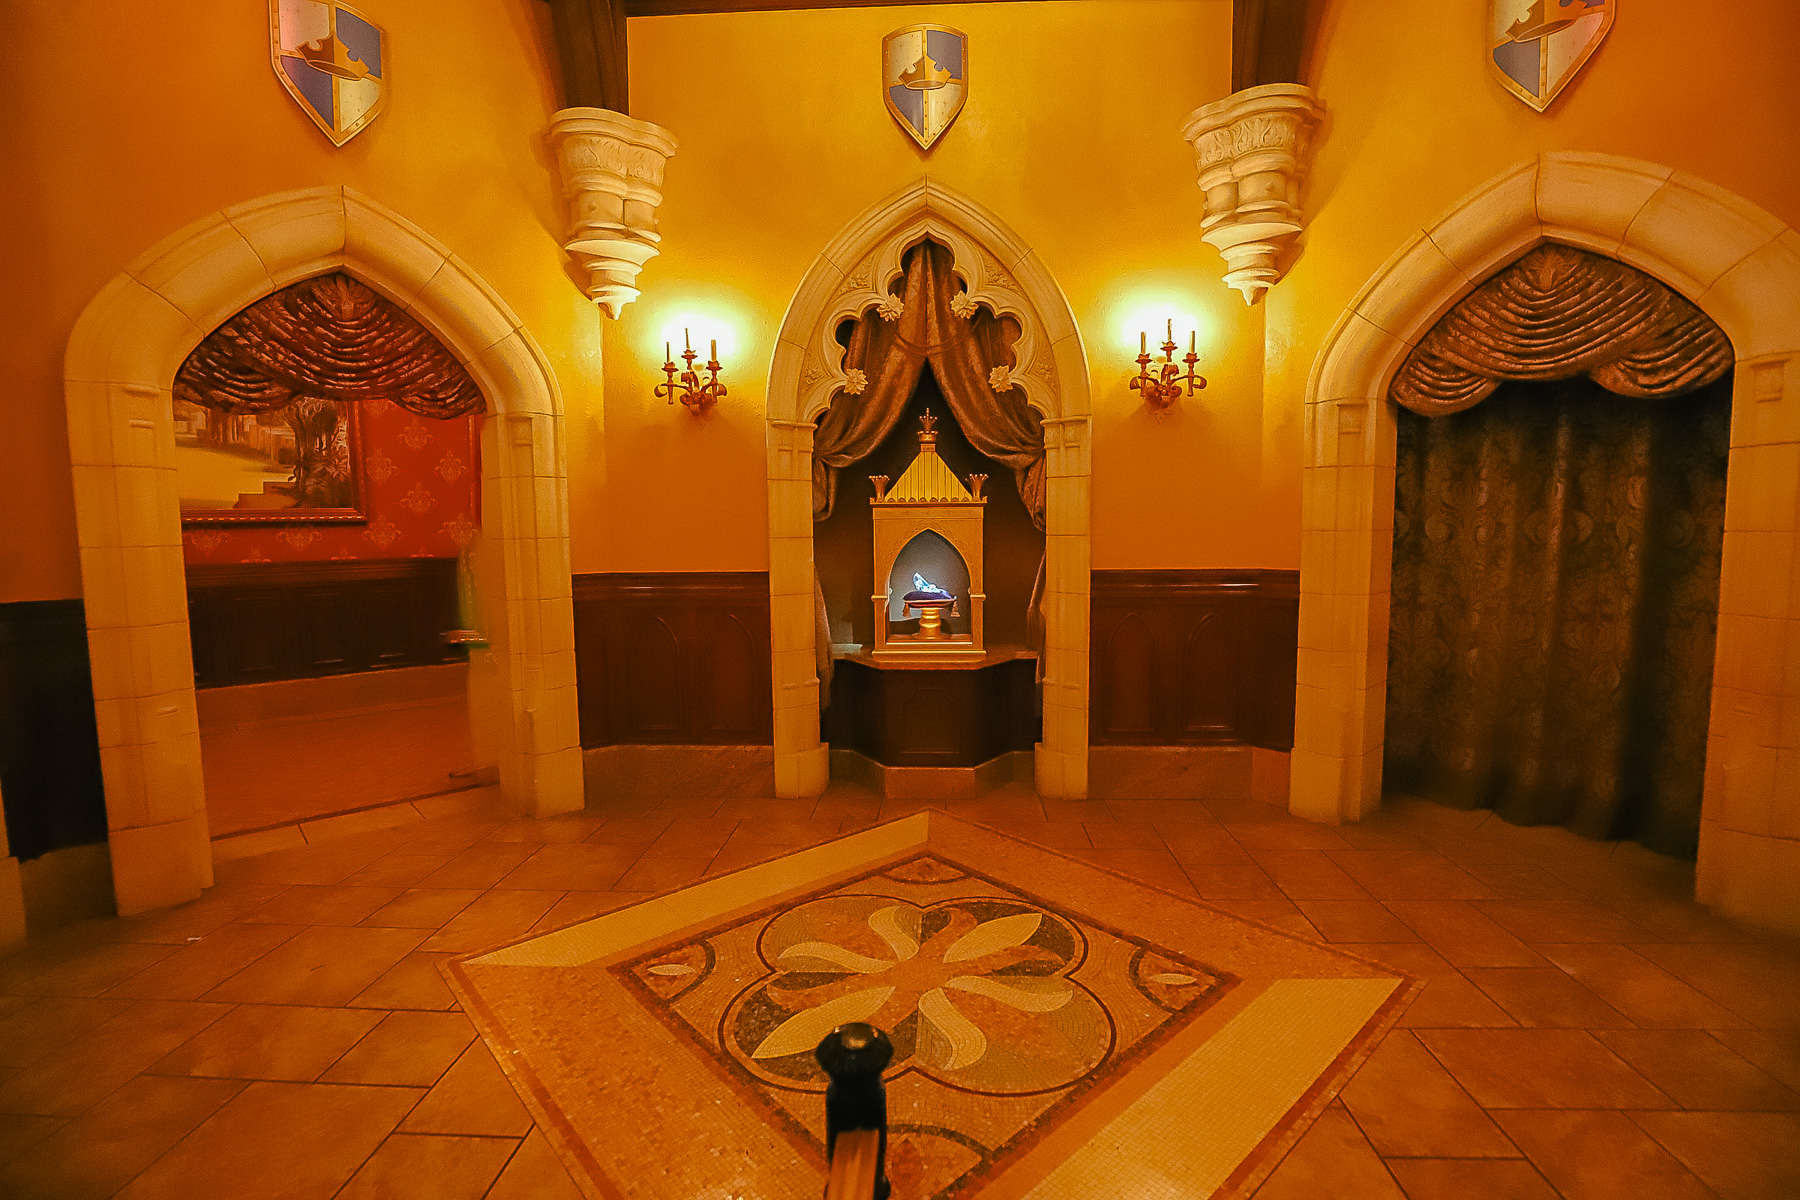 area before you enter the room to meet with princesses 